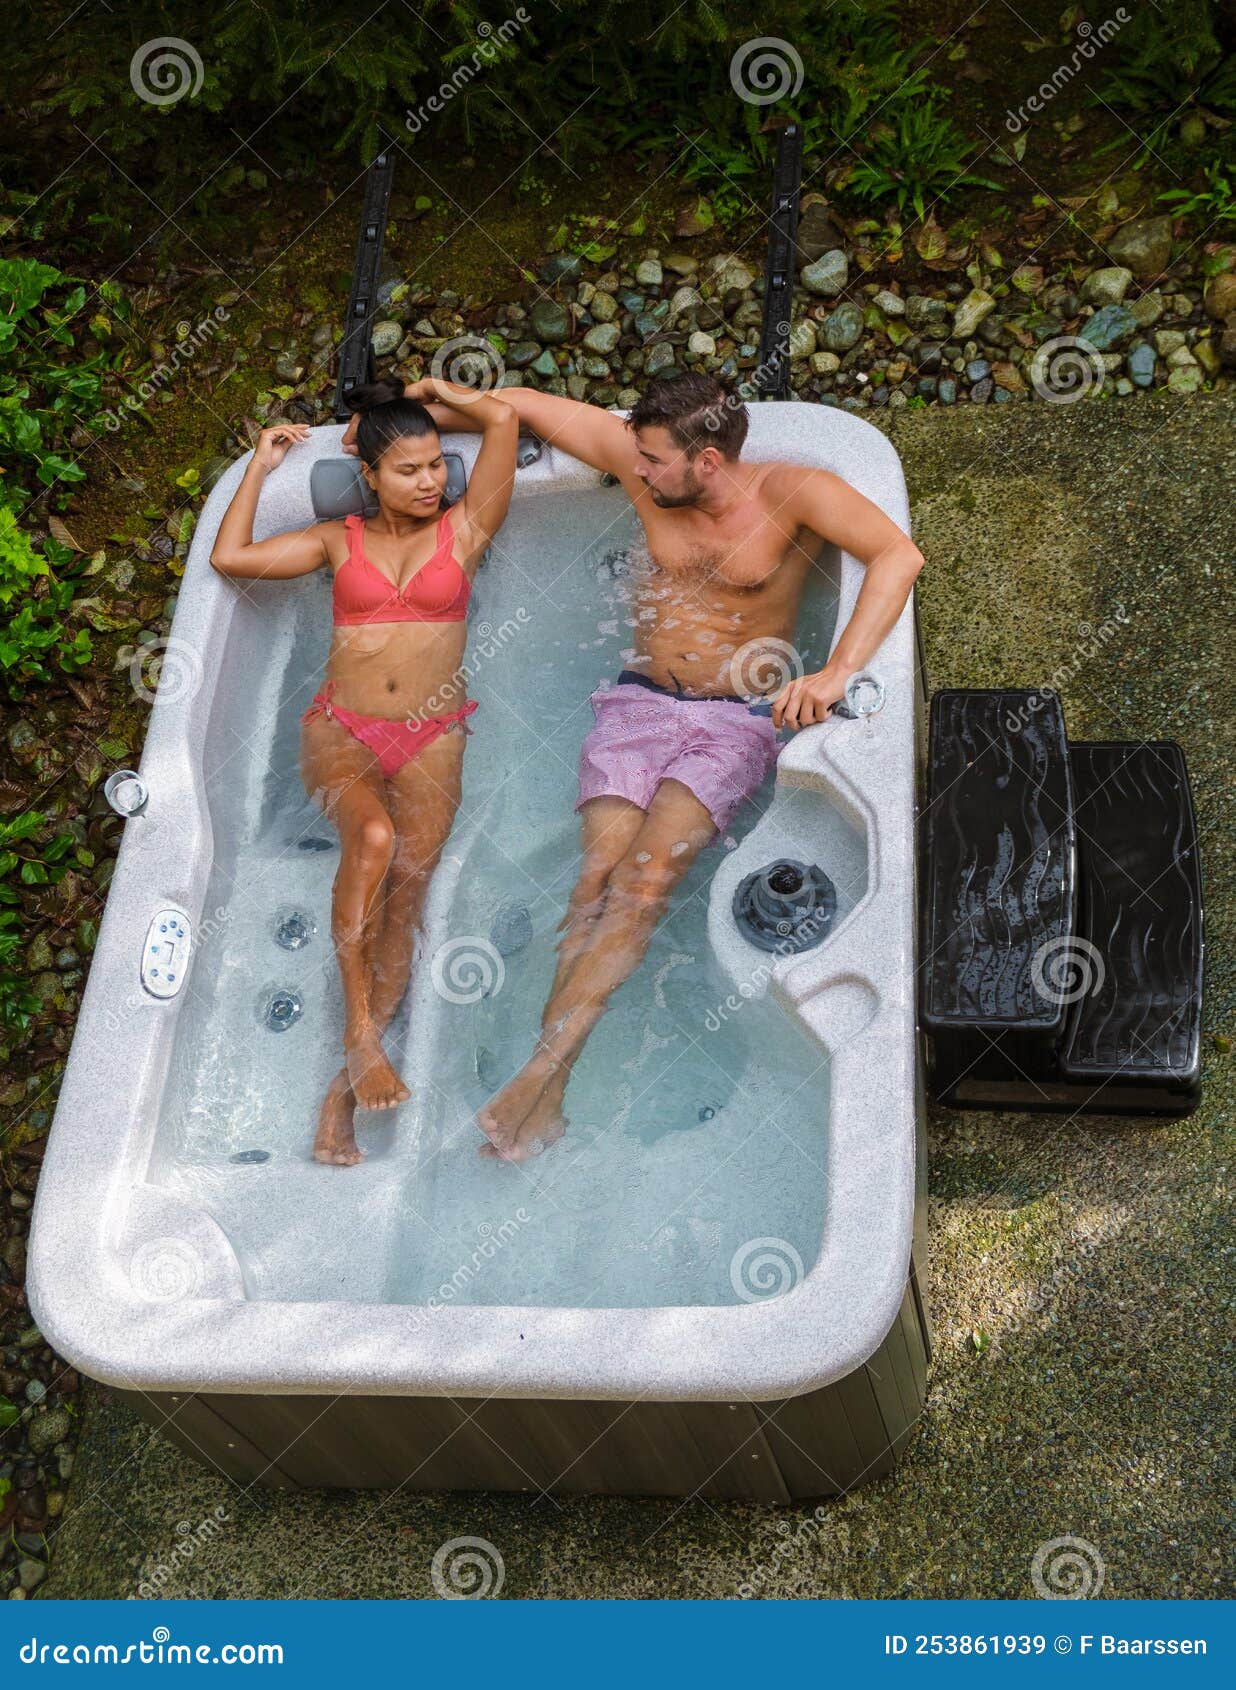 Sexy Women Hot Tub Stock Photos picture image